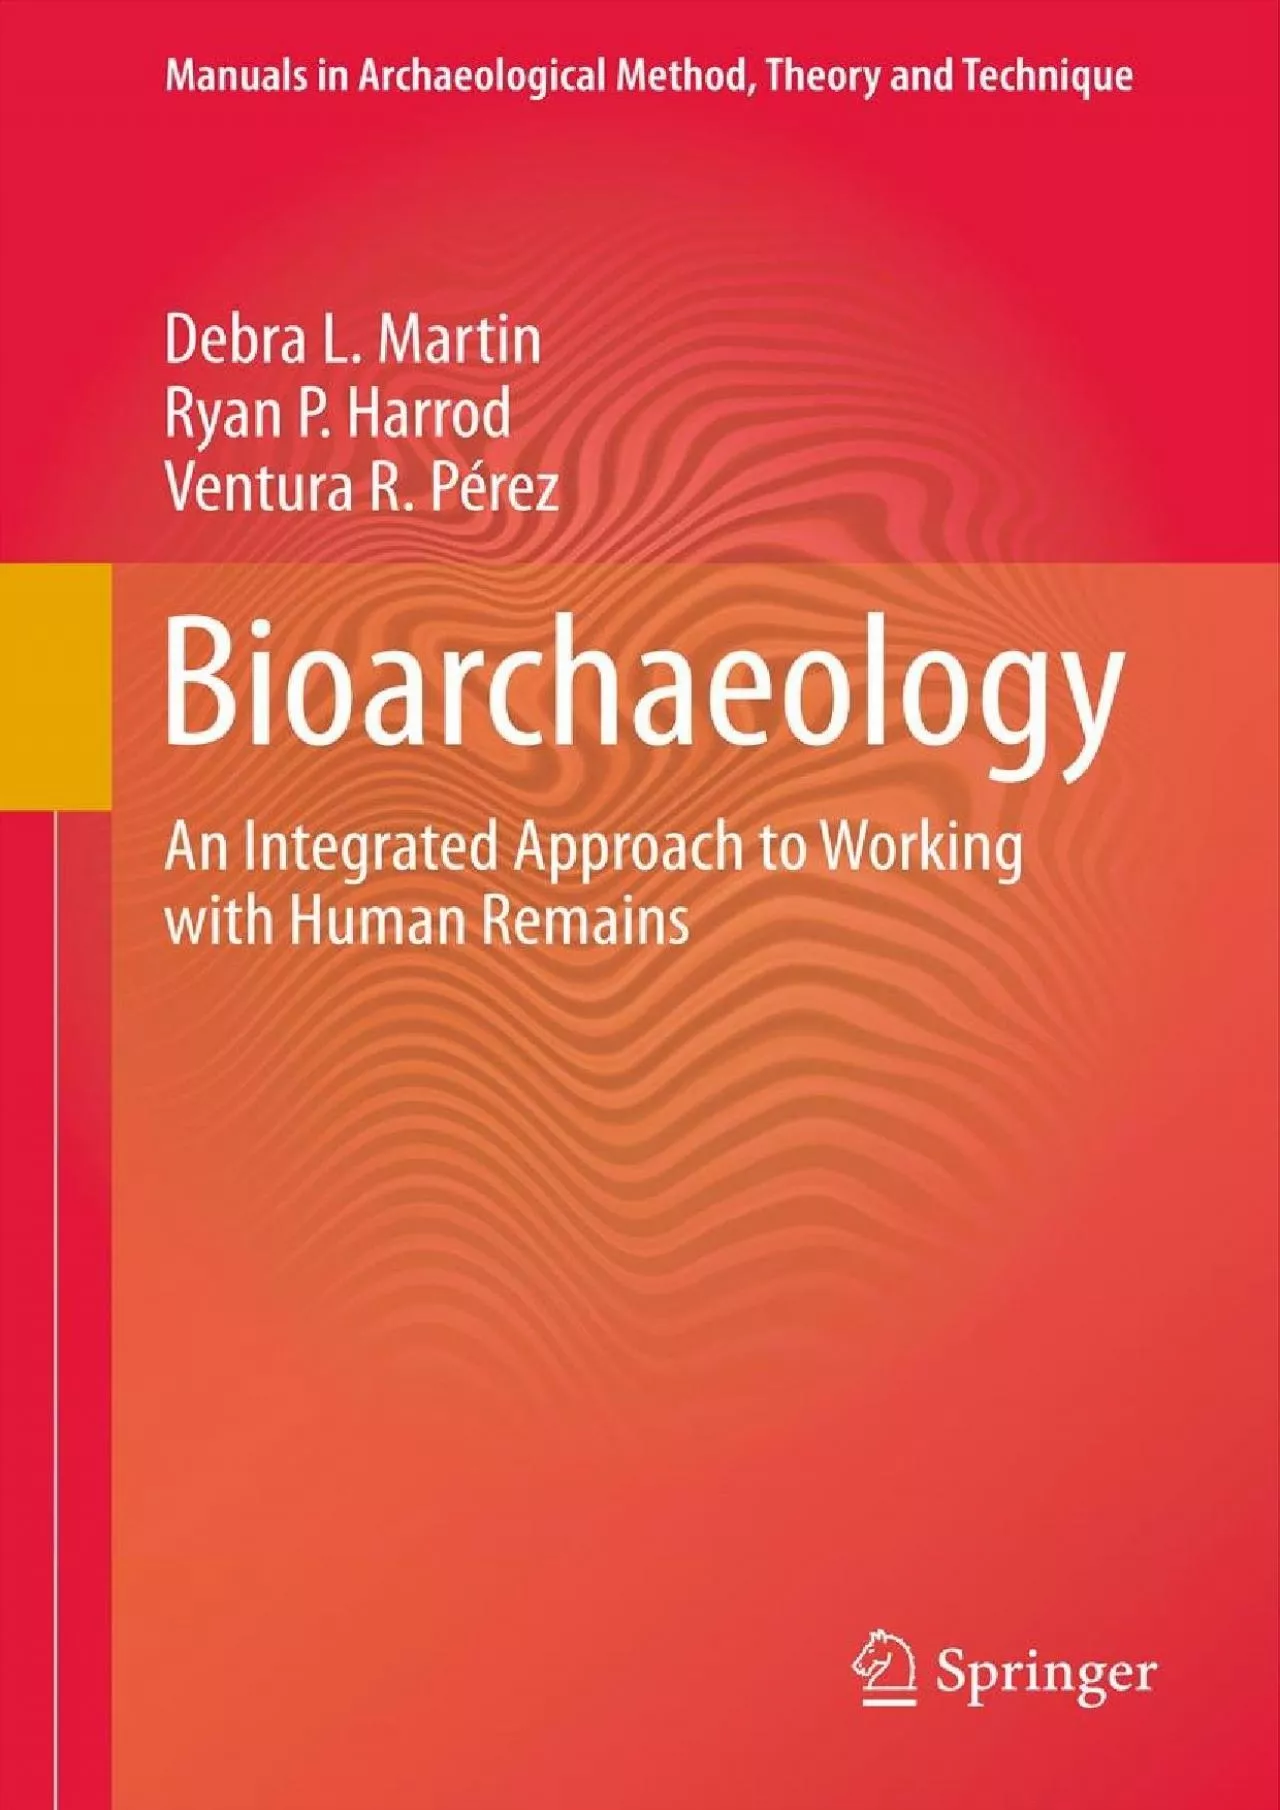 (EBOOK)-Bioarchaeology: An Integrated Approach to Working with Human Remains (Manuals